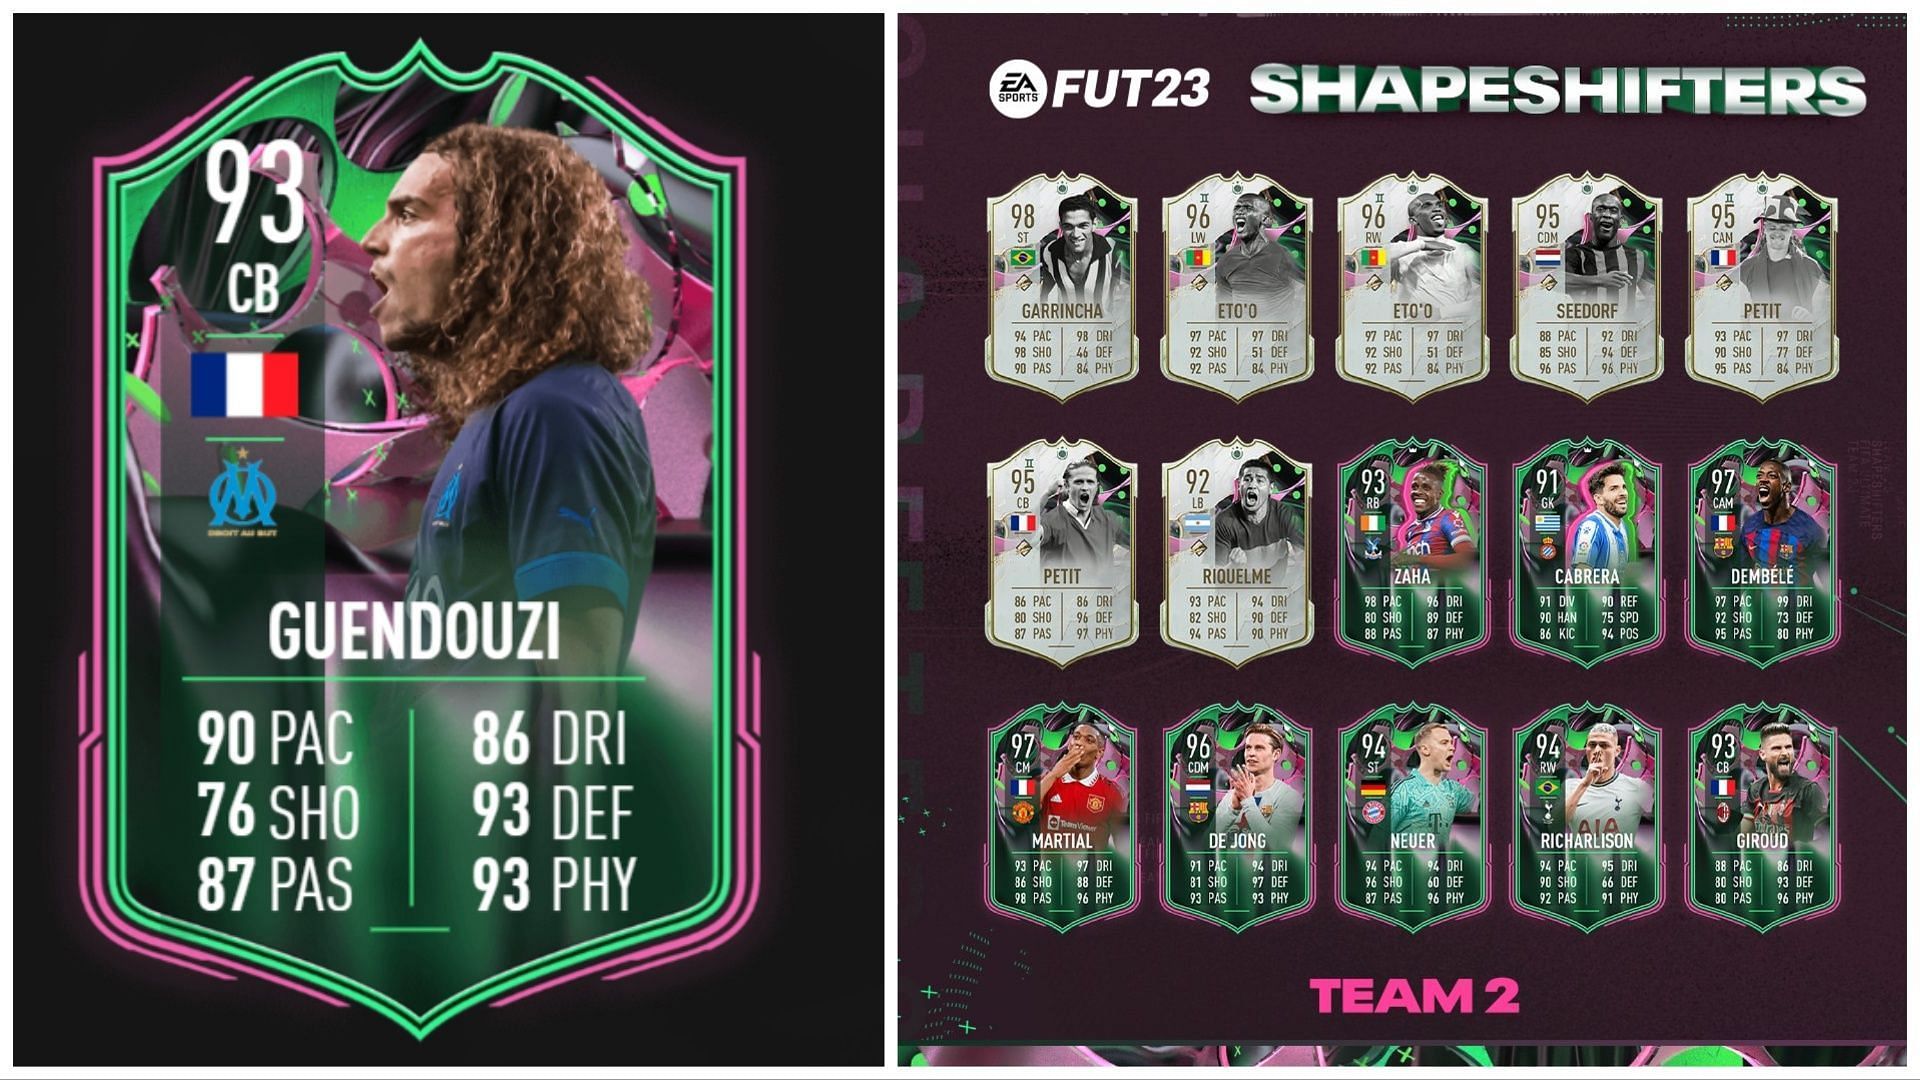 Shapeshifters Guendouzi is now available in FIFA 23 (Images via EA Sports)